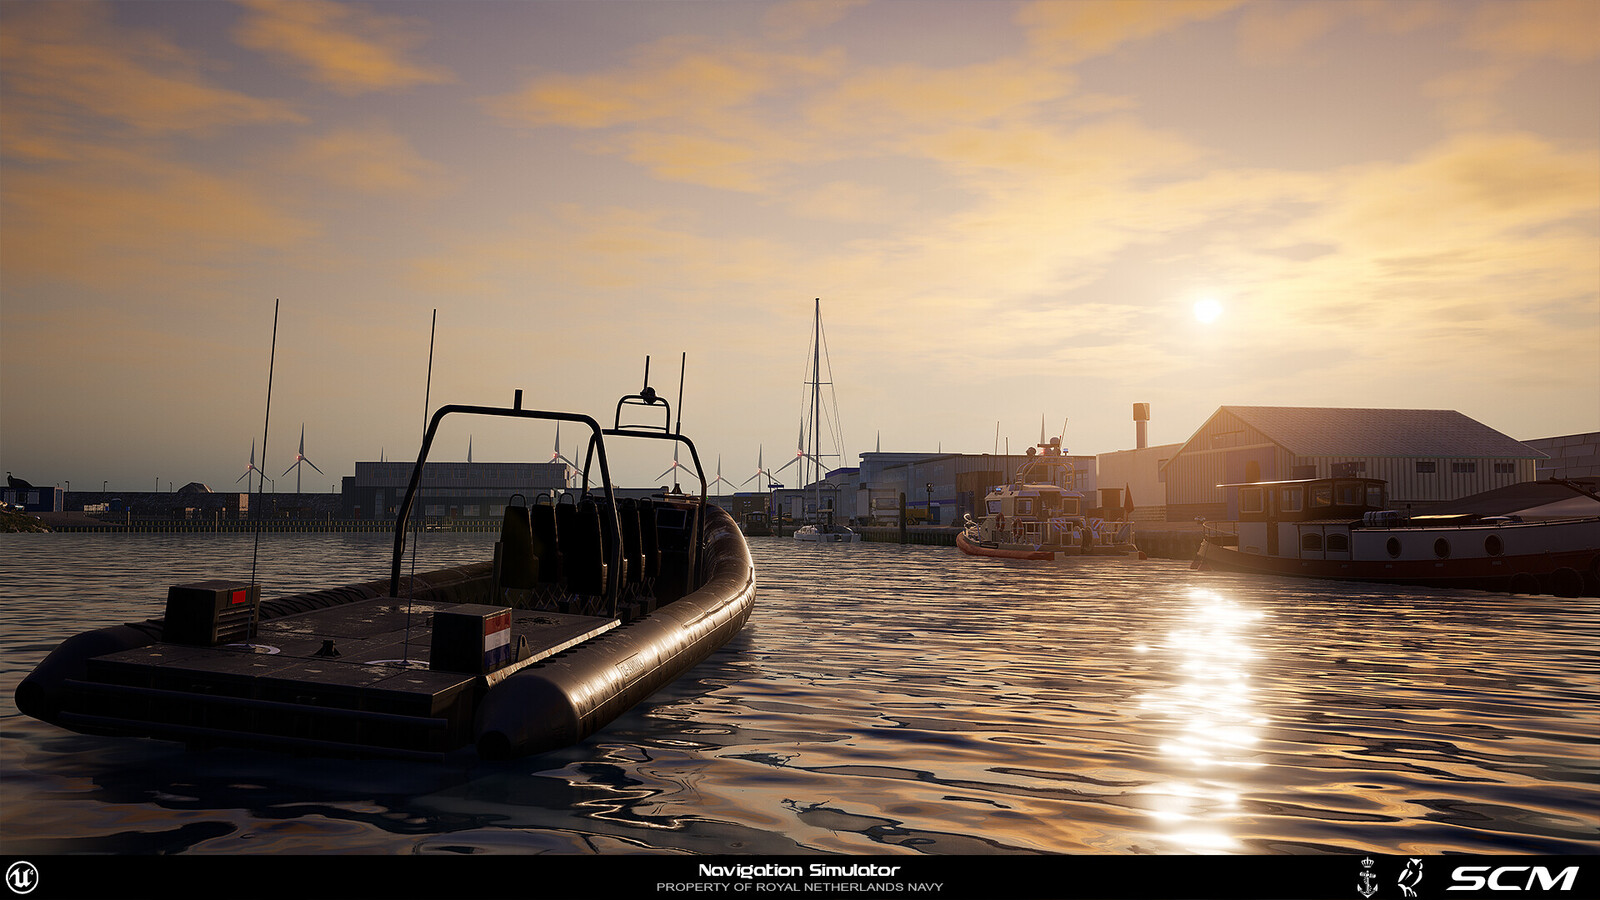 Navigation Simulation - I textured the boat and helped creating shaders for the displays the players use, set up material collection parameters for a day/night cycle with lights turning on behind building windows, worked on building shaders and pipeline.